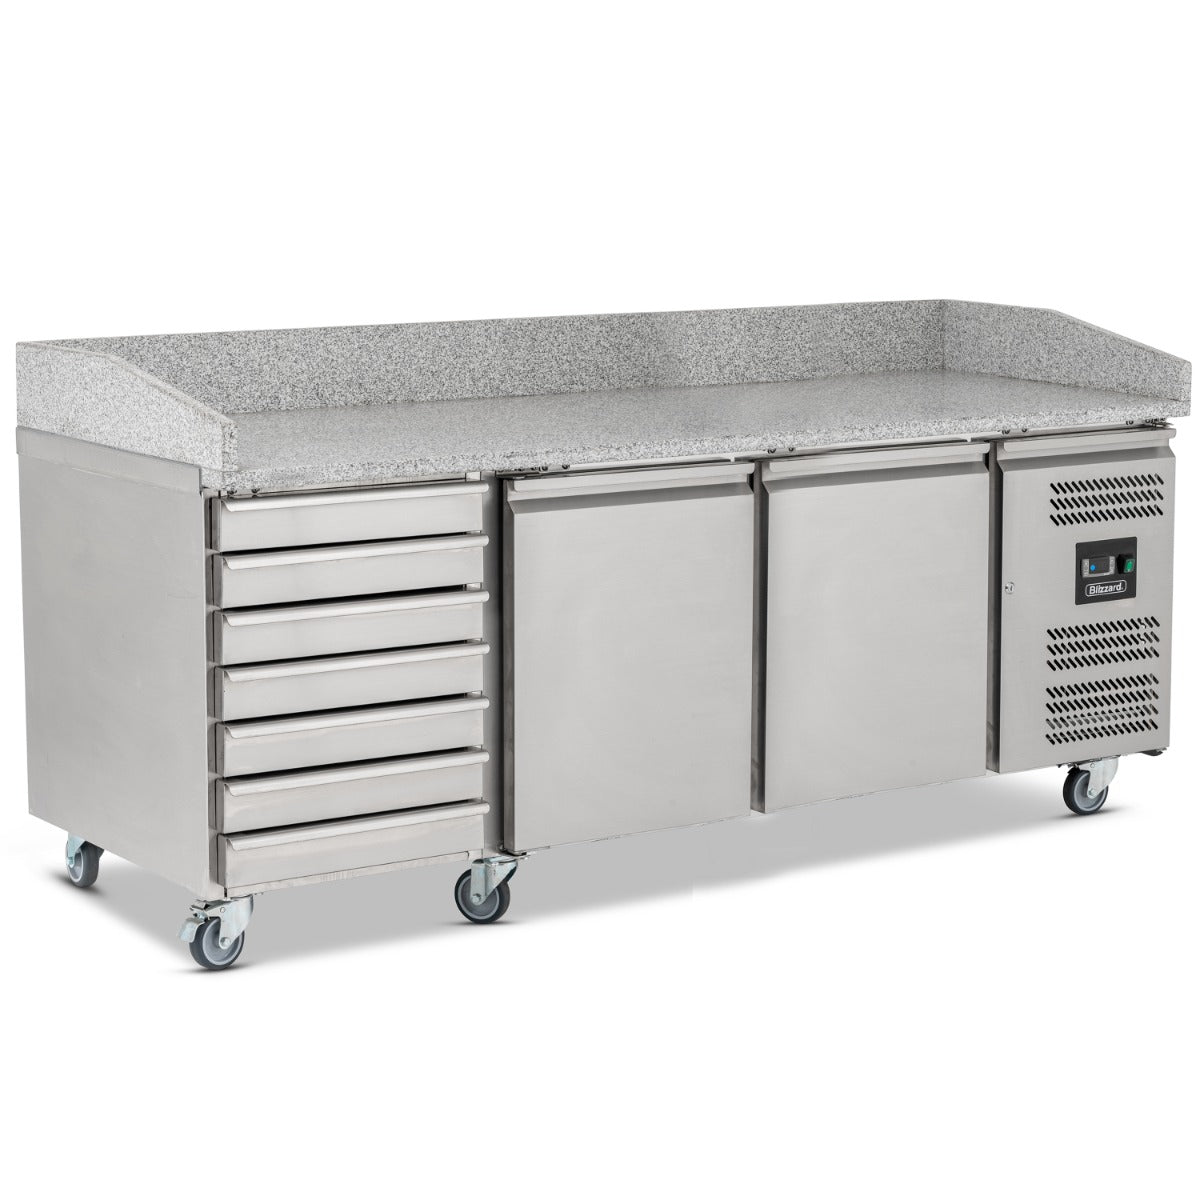 Blizzard 2 Dr Pizza Prep Counter with Neutral drawers 580L